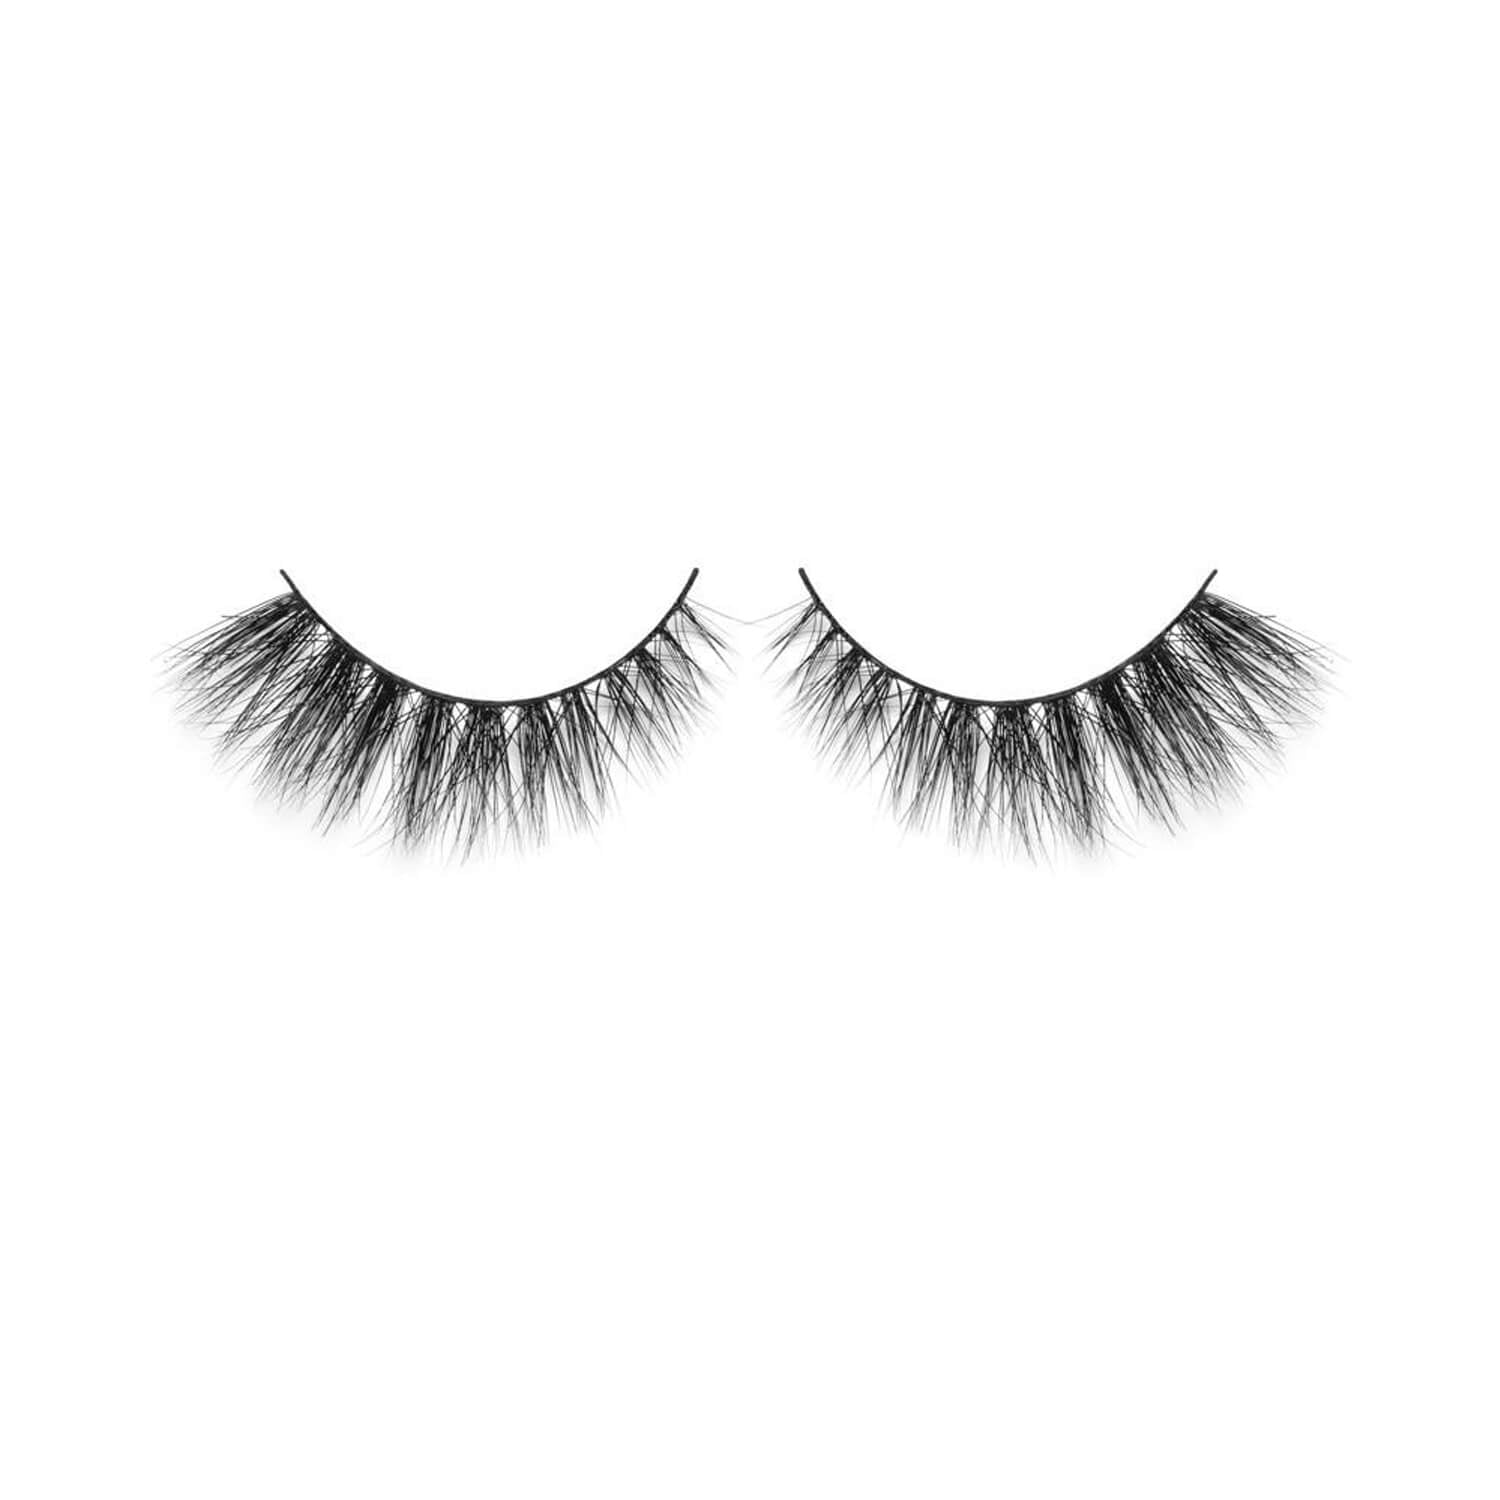 Lilly Lashes Doha 3D Mink Lashes